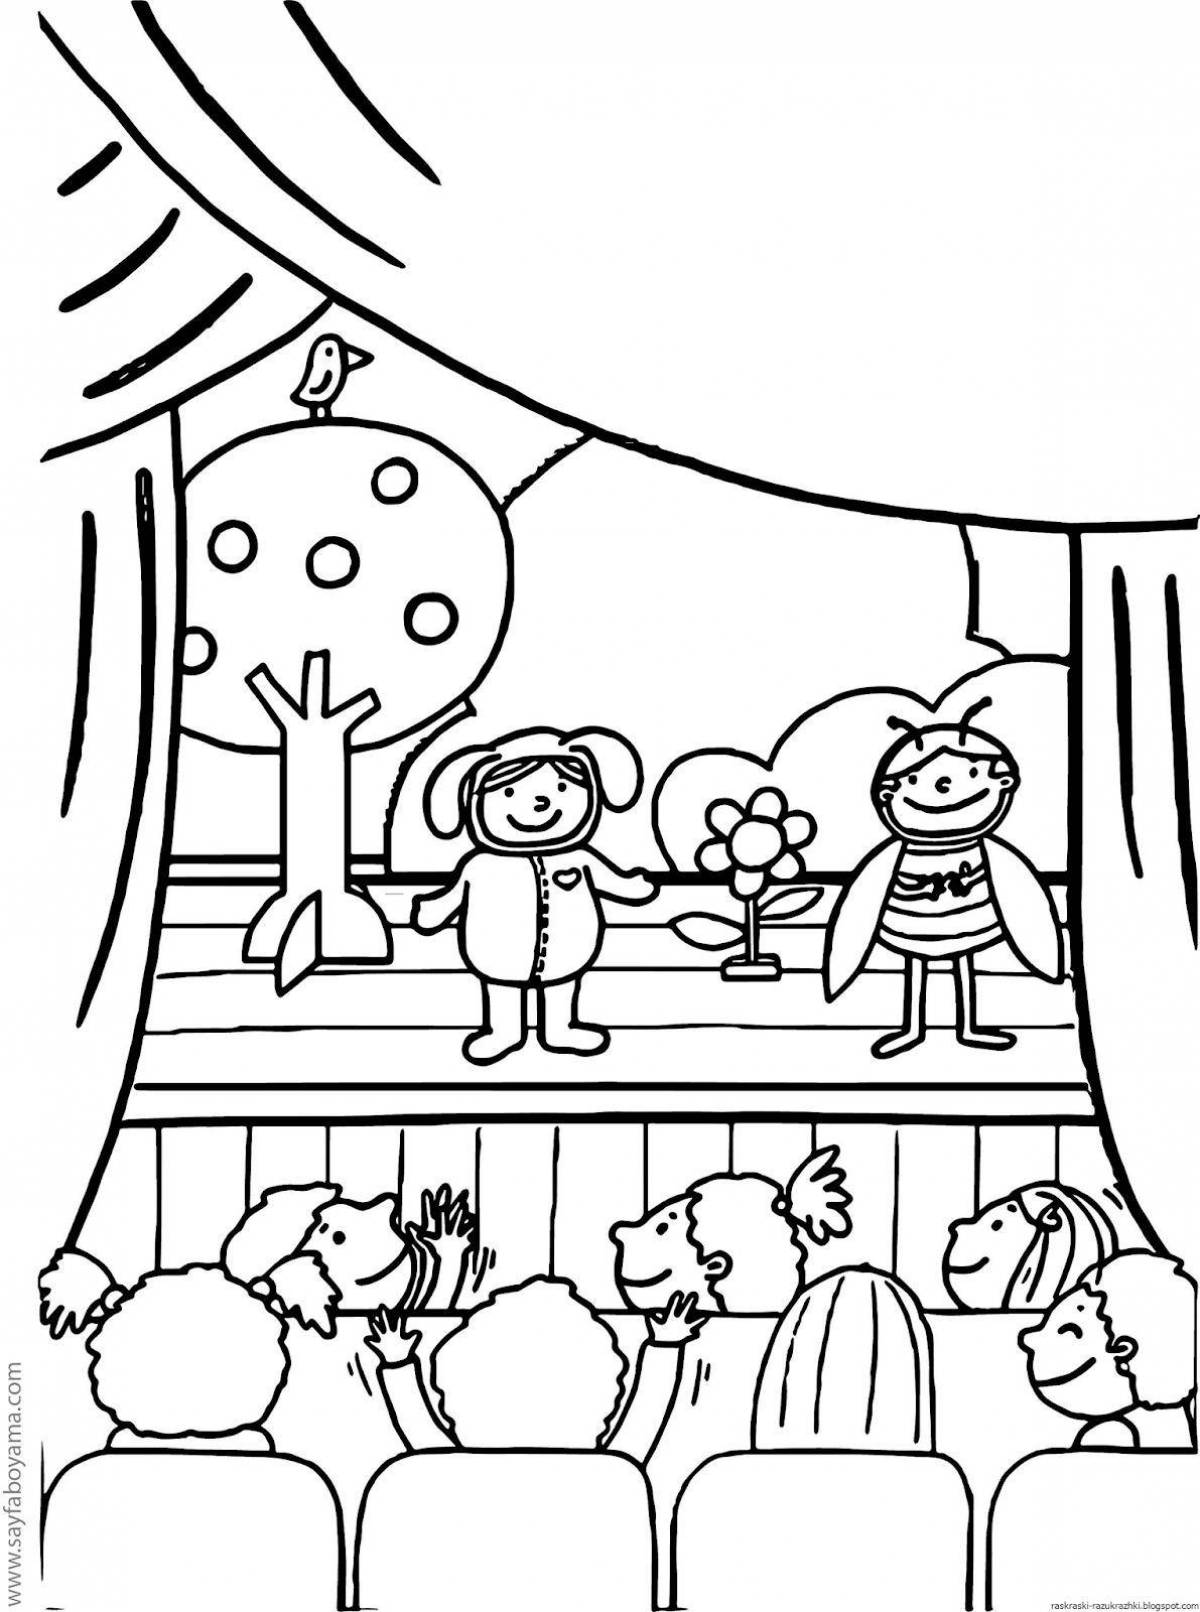 Violent theater coloring pages for kids